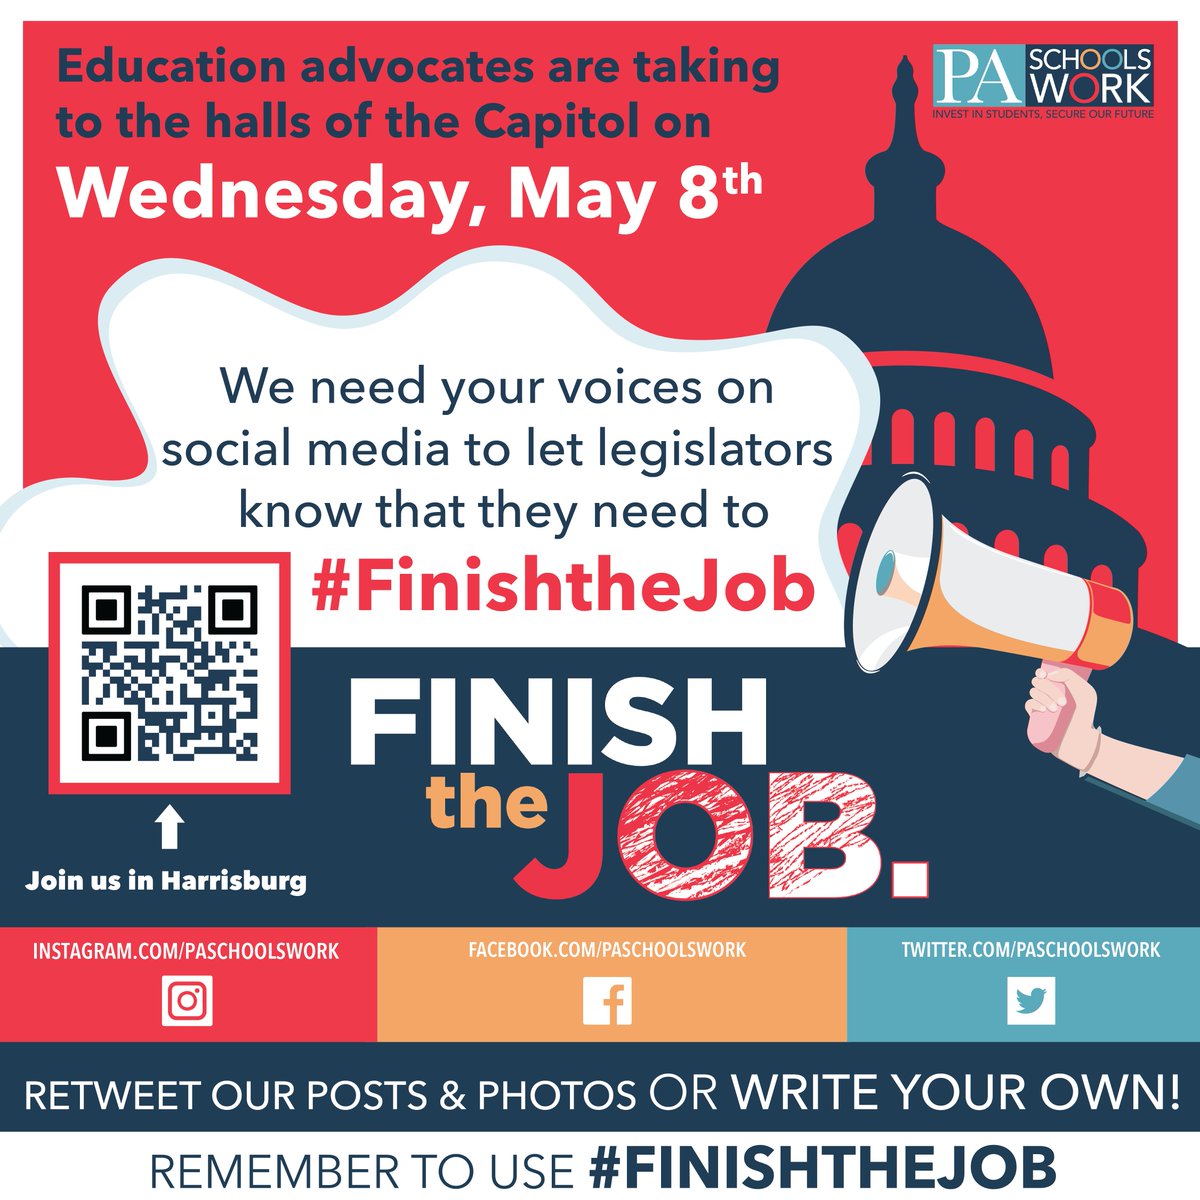 PA Schools Work is heading to Harrisburg on Wednesday! Join us on social media as we urge PA legislators to #FinishTheJob and #FundPAPublicSchools in the #PABudget. Join us in Harrisburg ⬇️ ow.ly/Bsxg50Rwimc